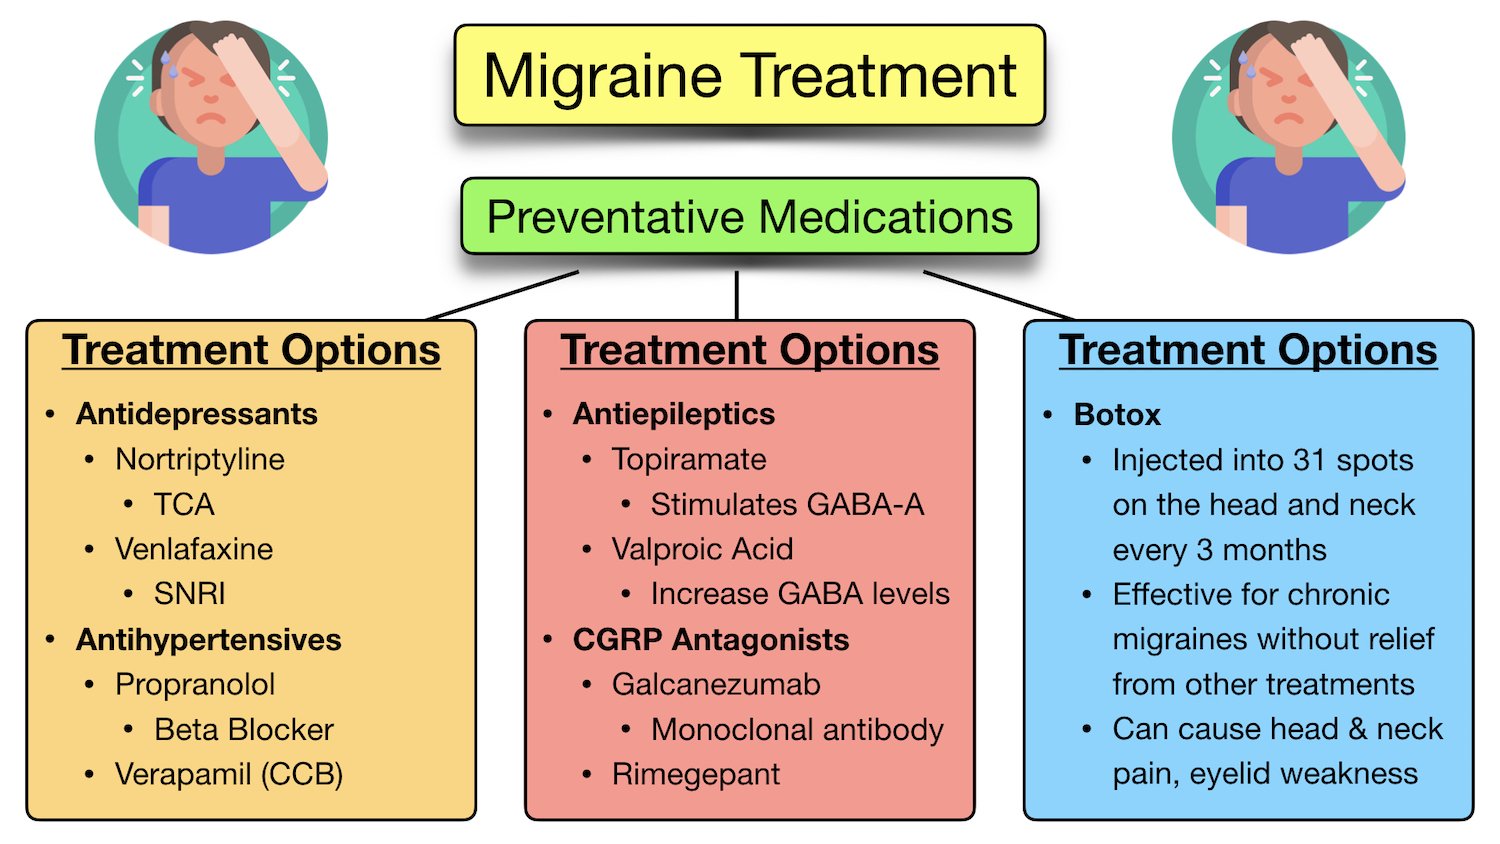 Migraine Treatments  What Options Do You Have?